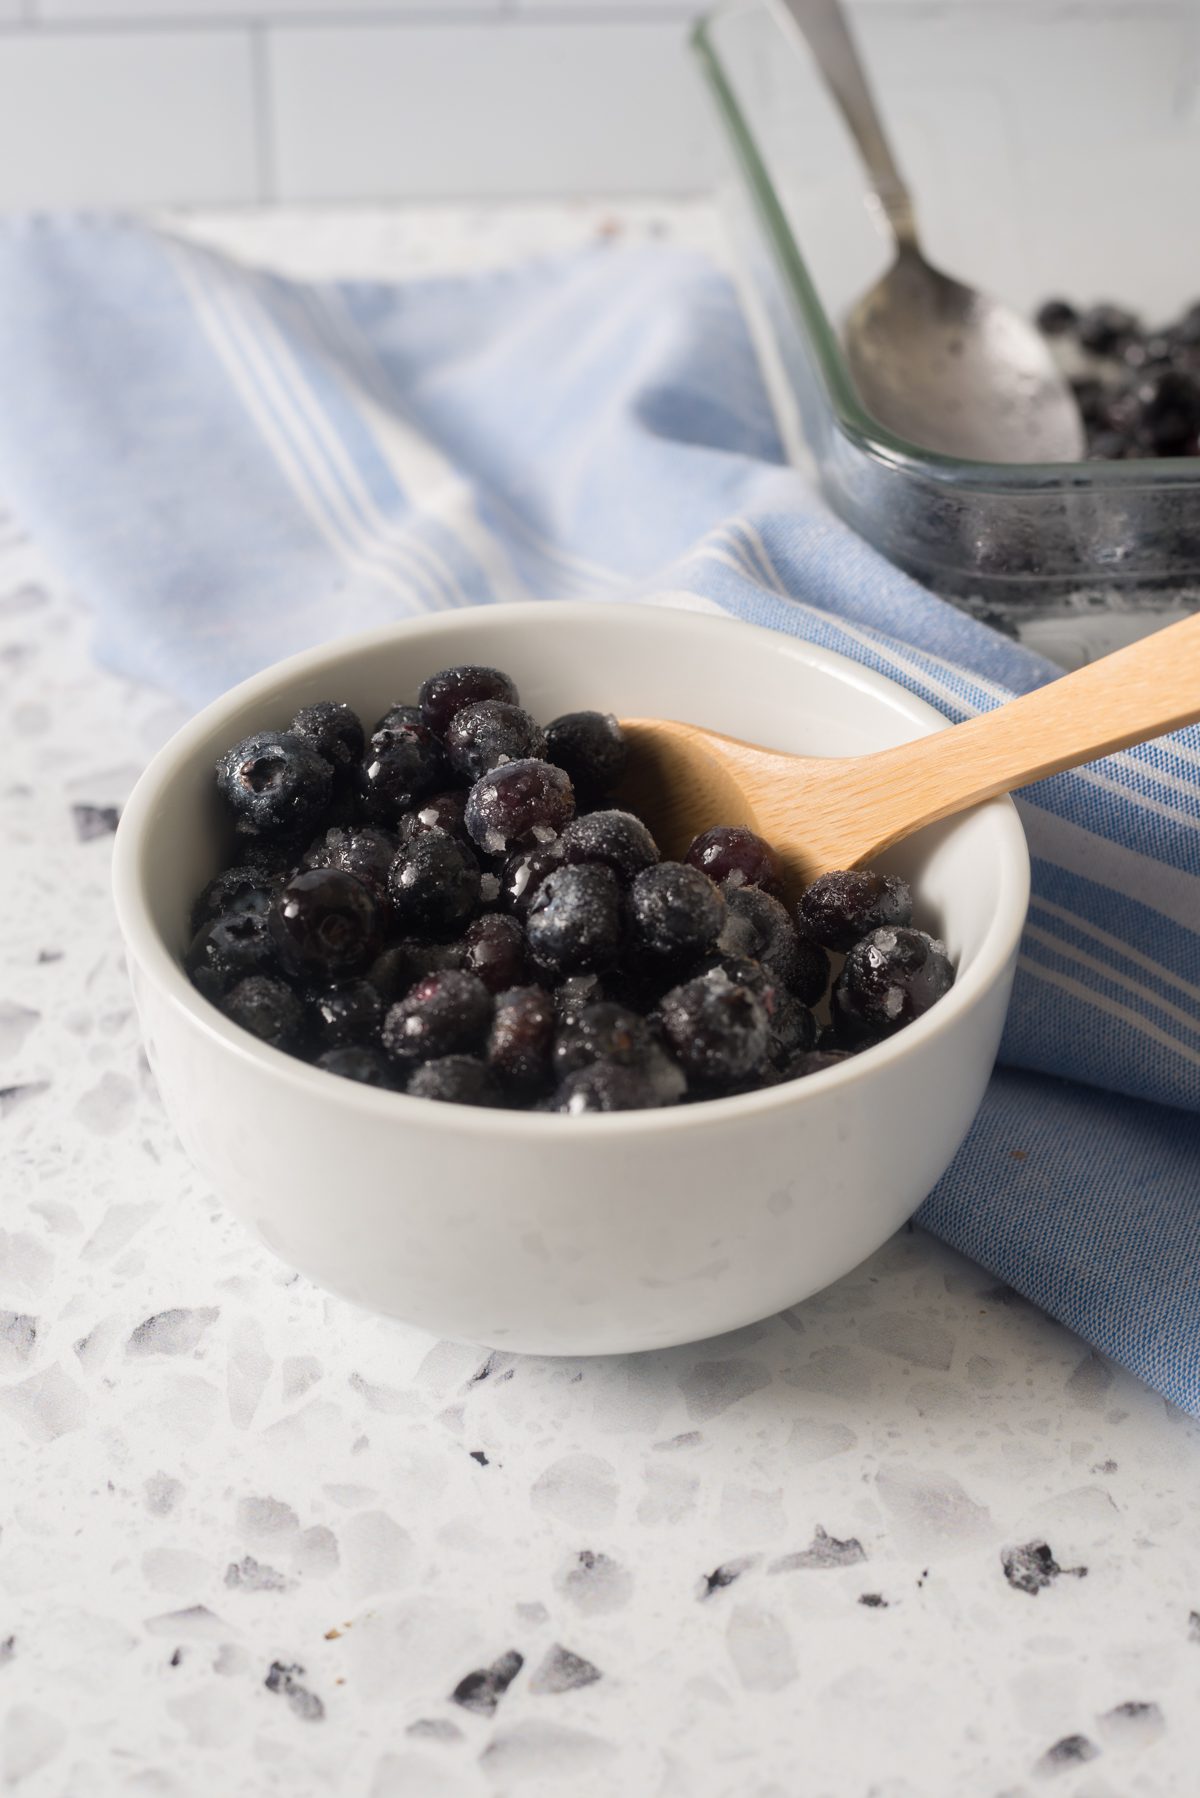 Super simple frozen snack made with blueberries, lemon juice and sugar.